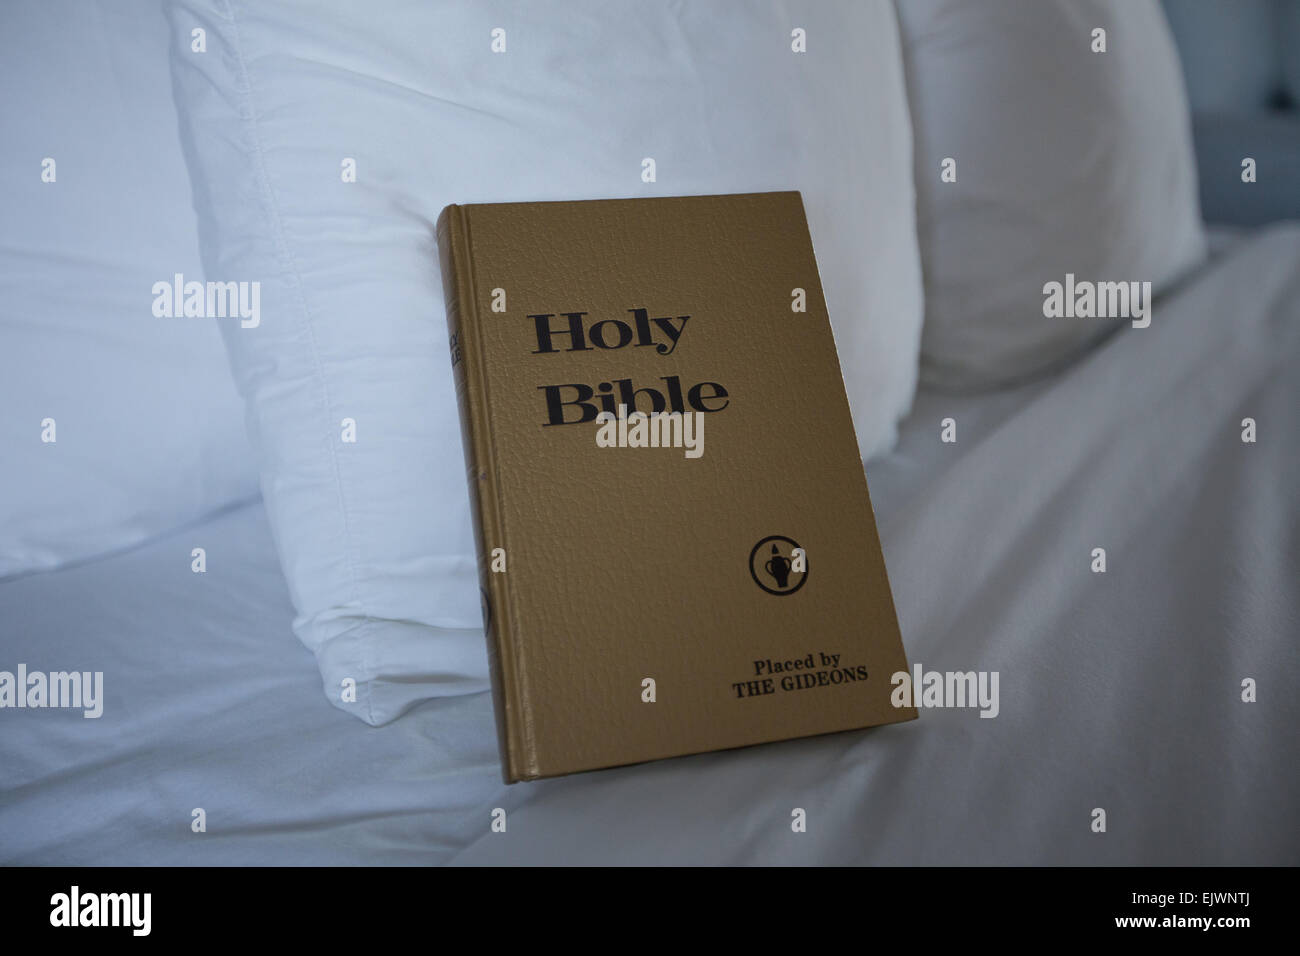 holy bible bed pillow Stock Photo